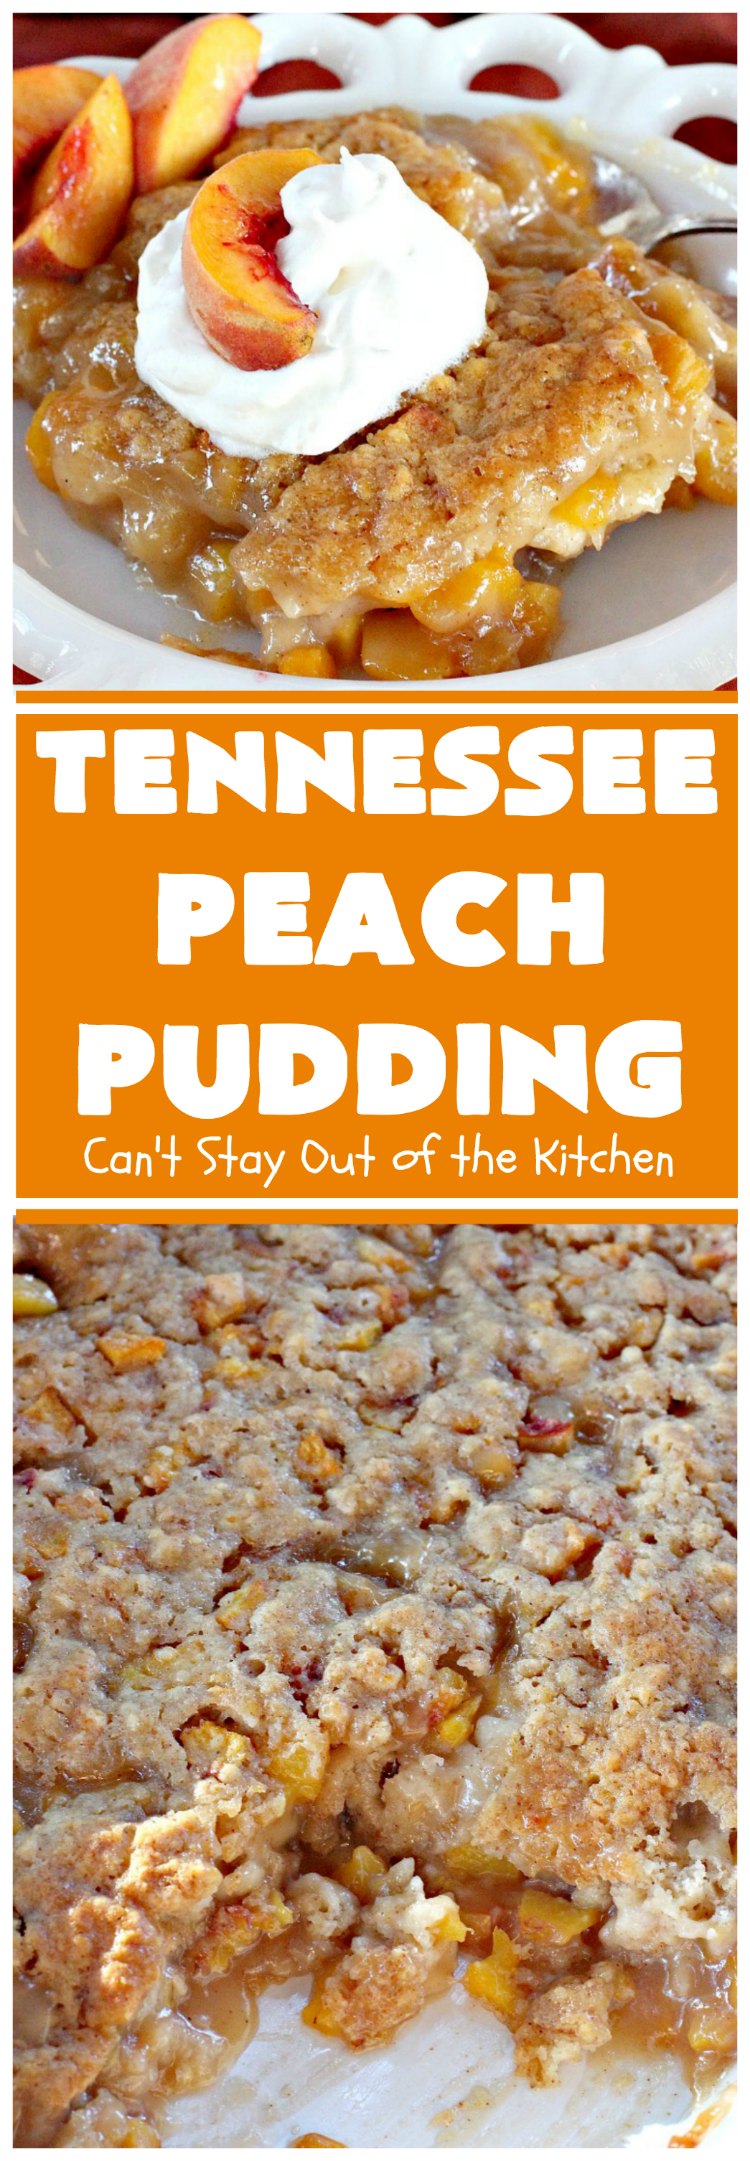 Tennessee Peach Pudding | Can't Stay Out of the Kitchen